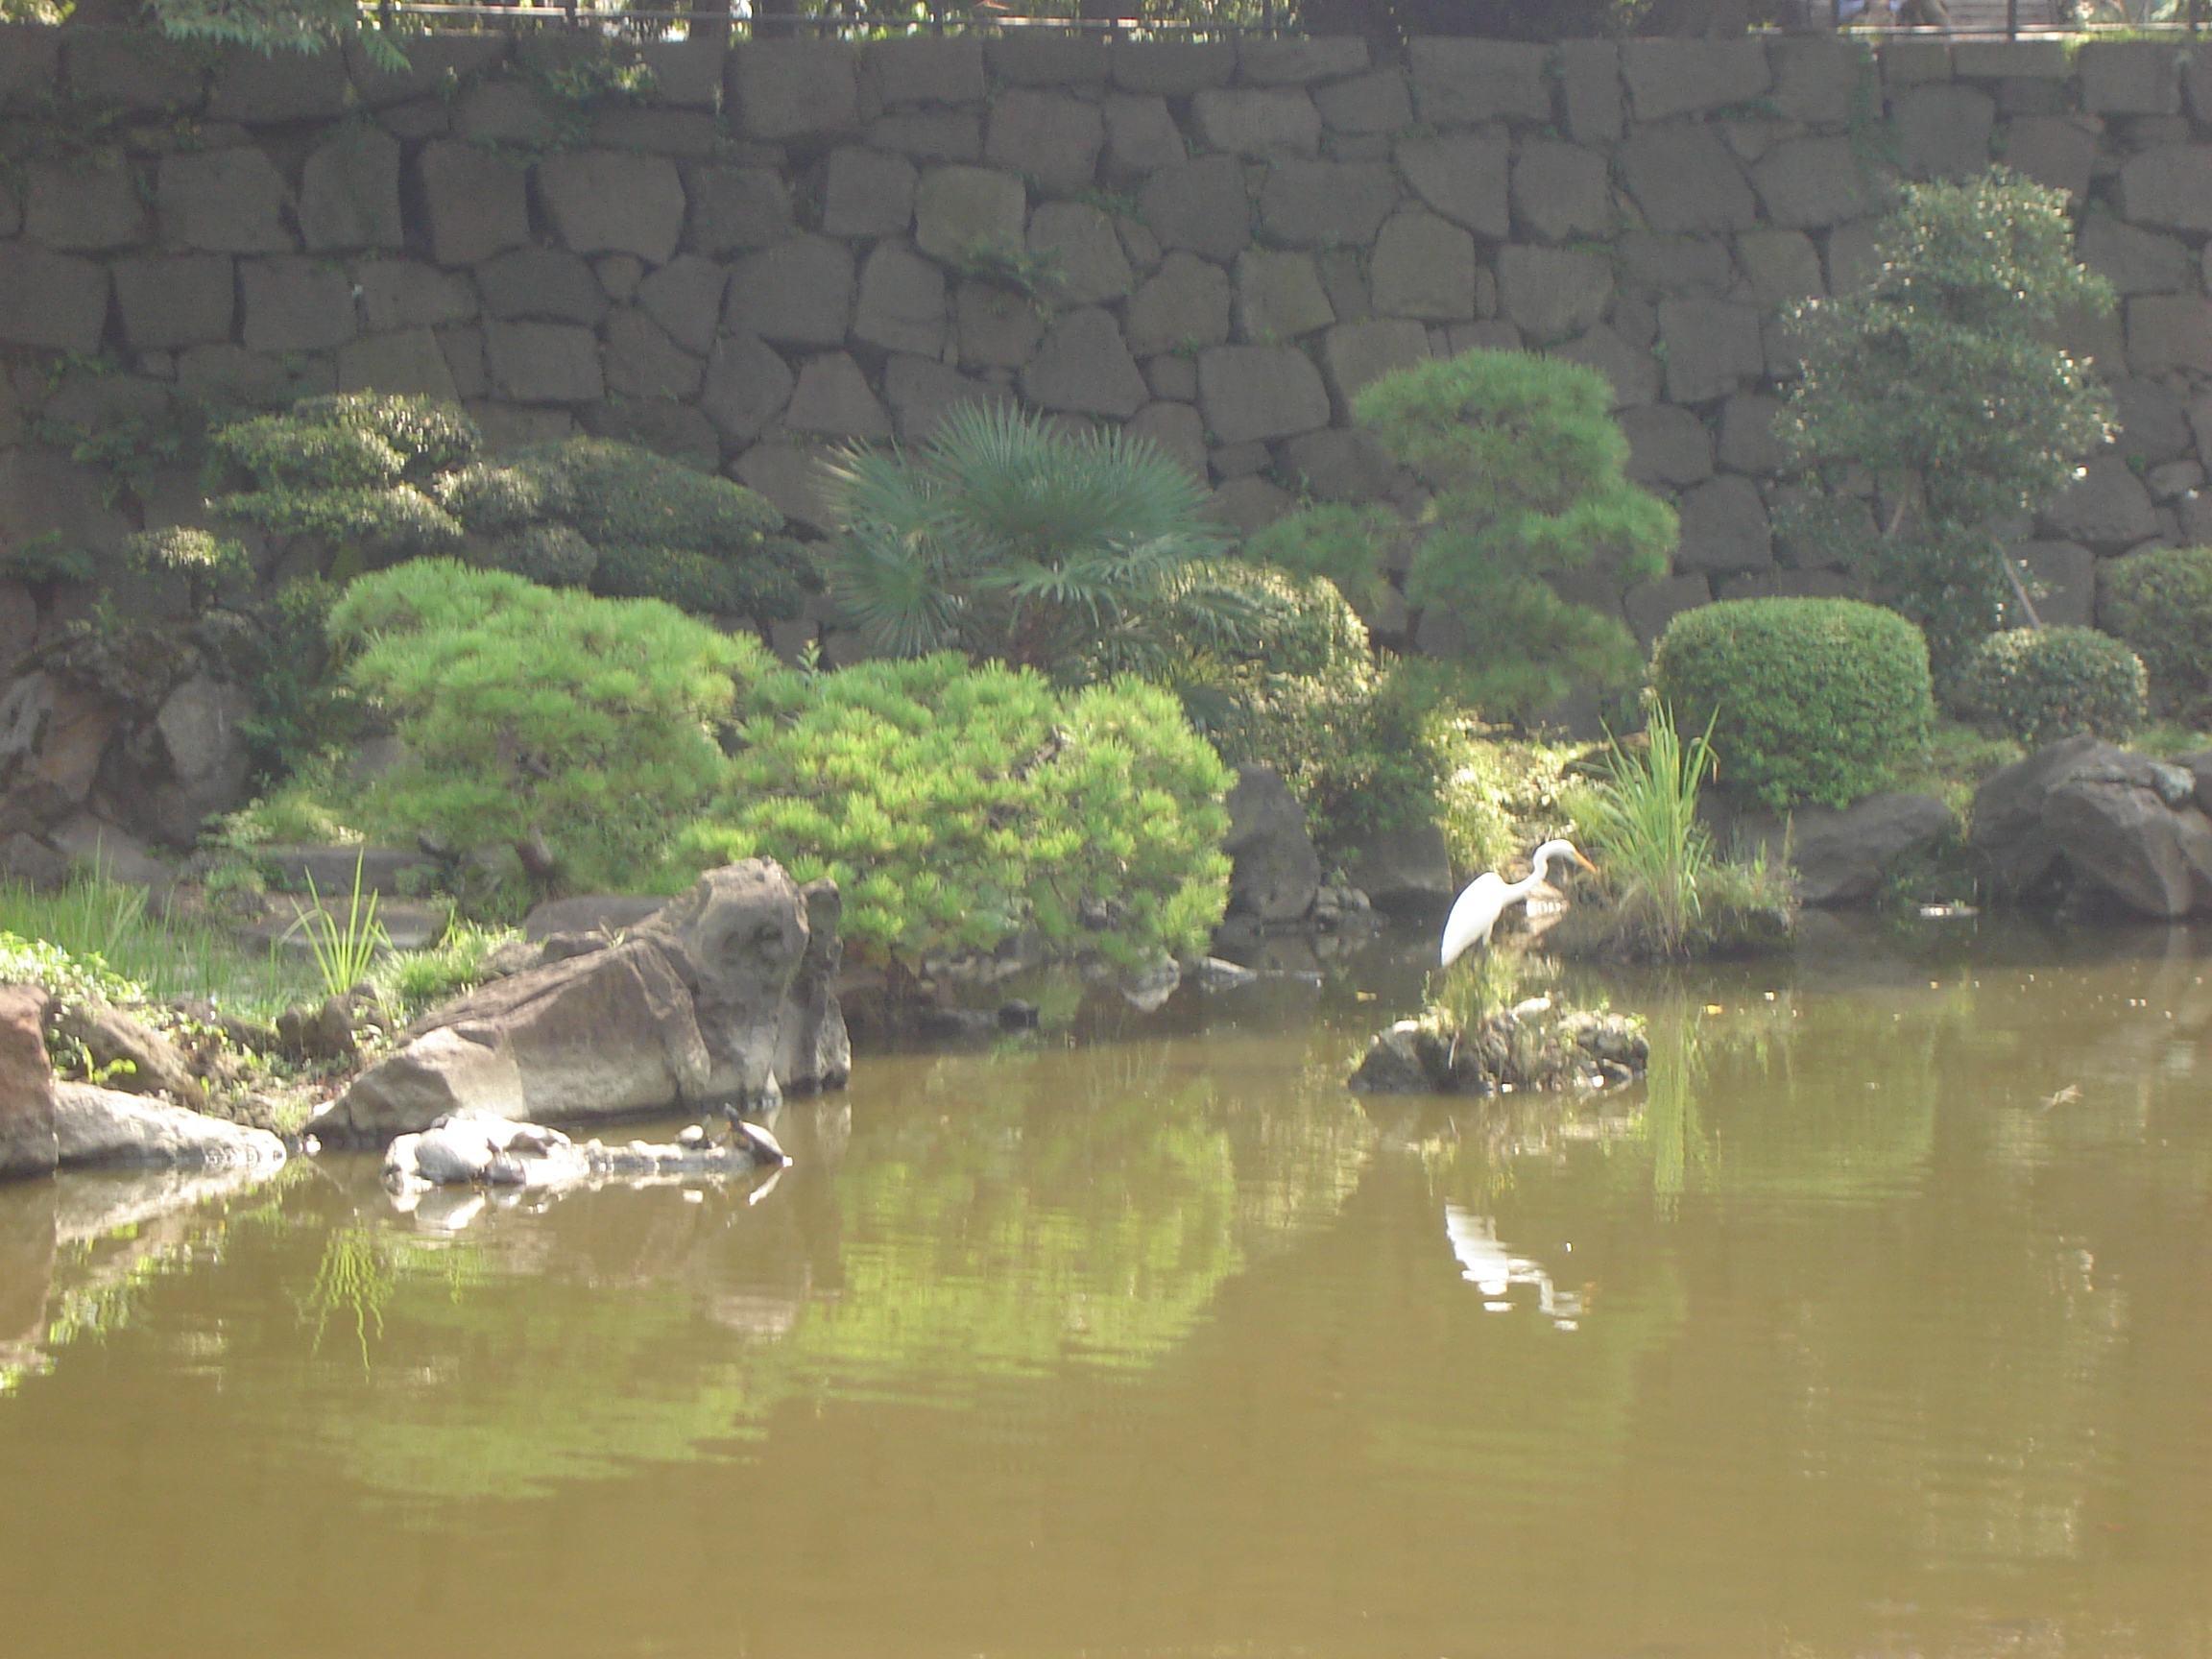 an egret drying off on a rock in water with a stone wall and shrubs in the background